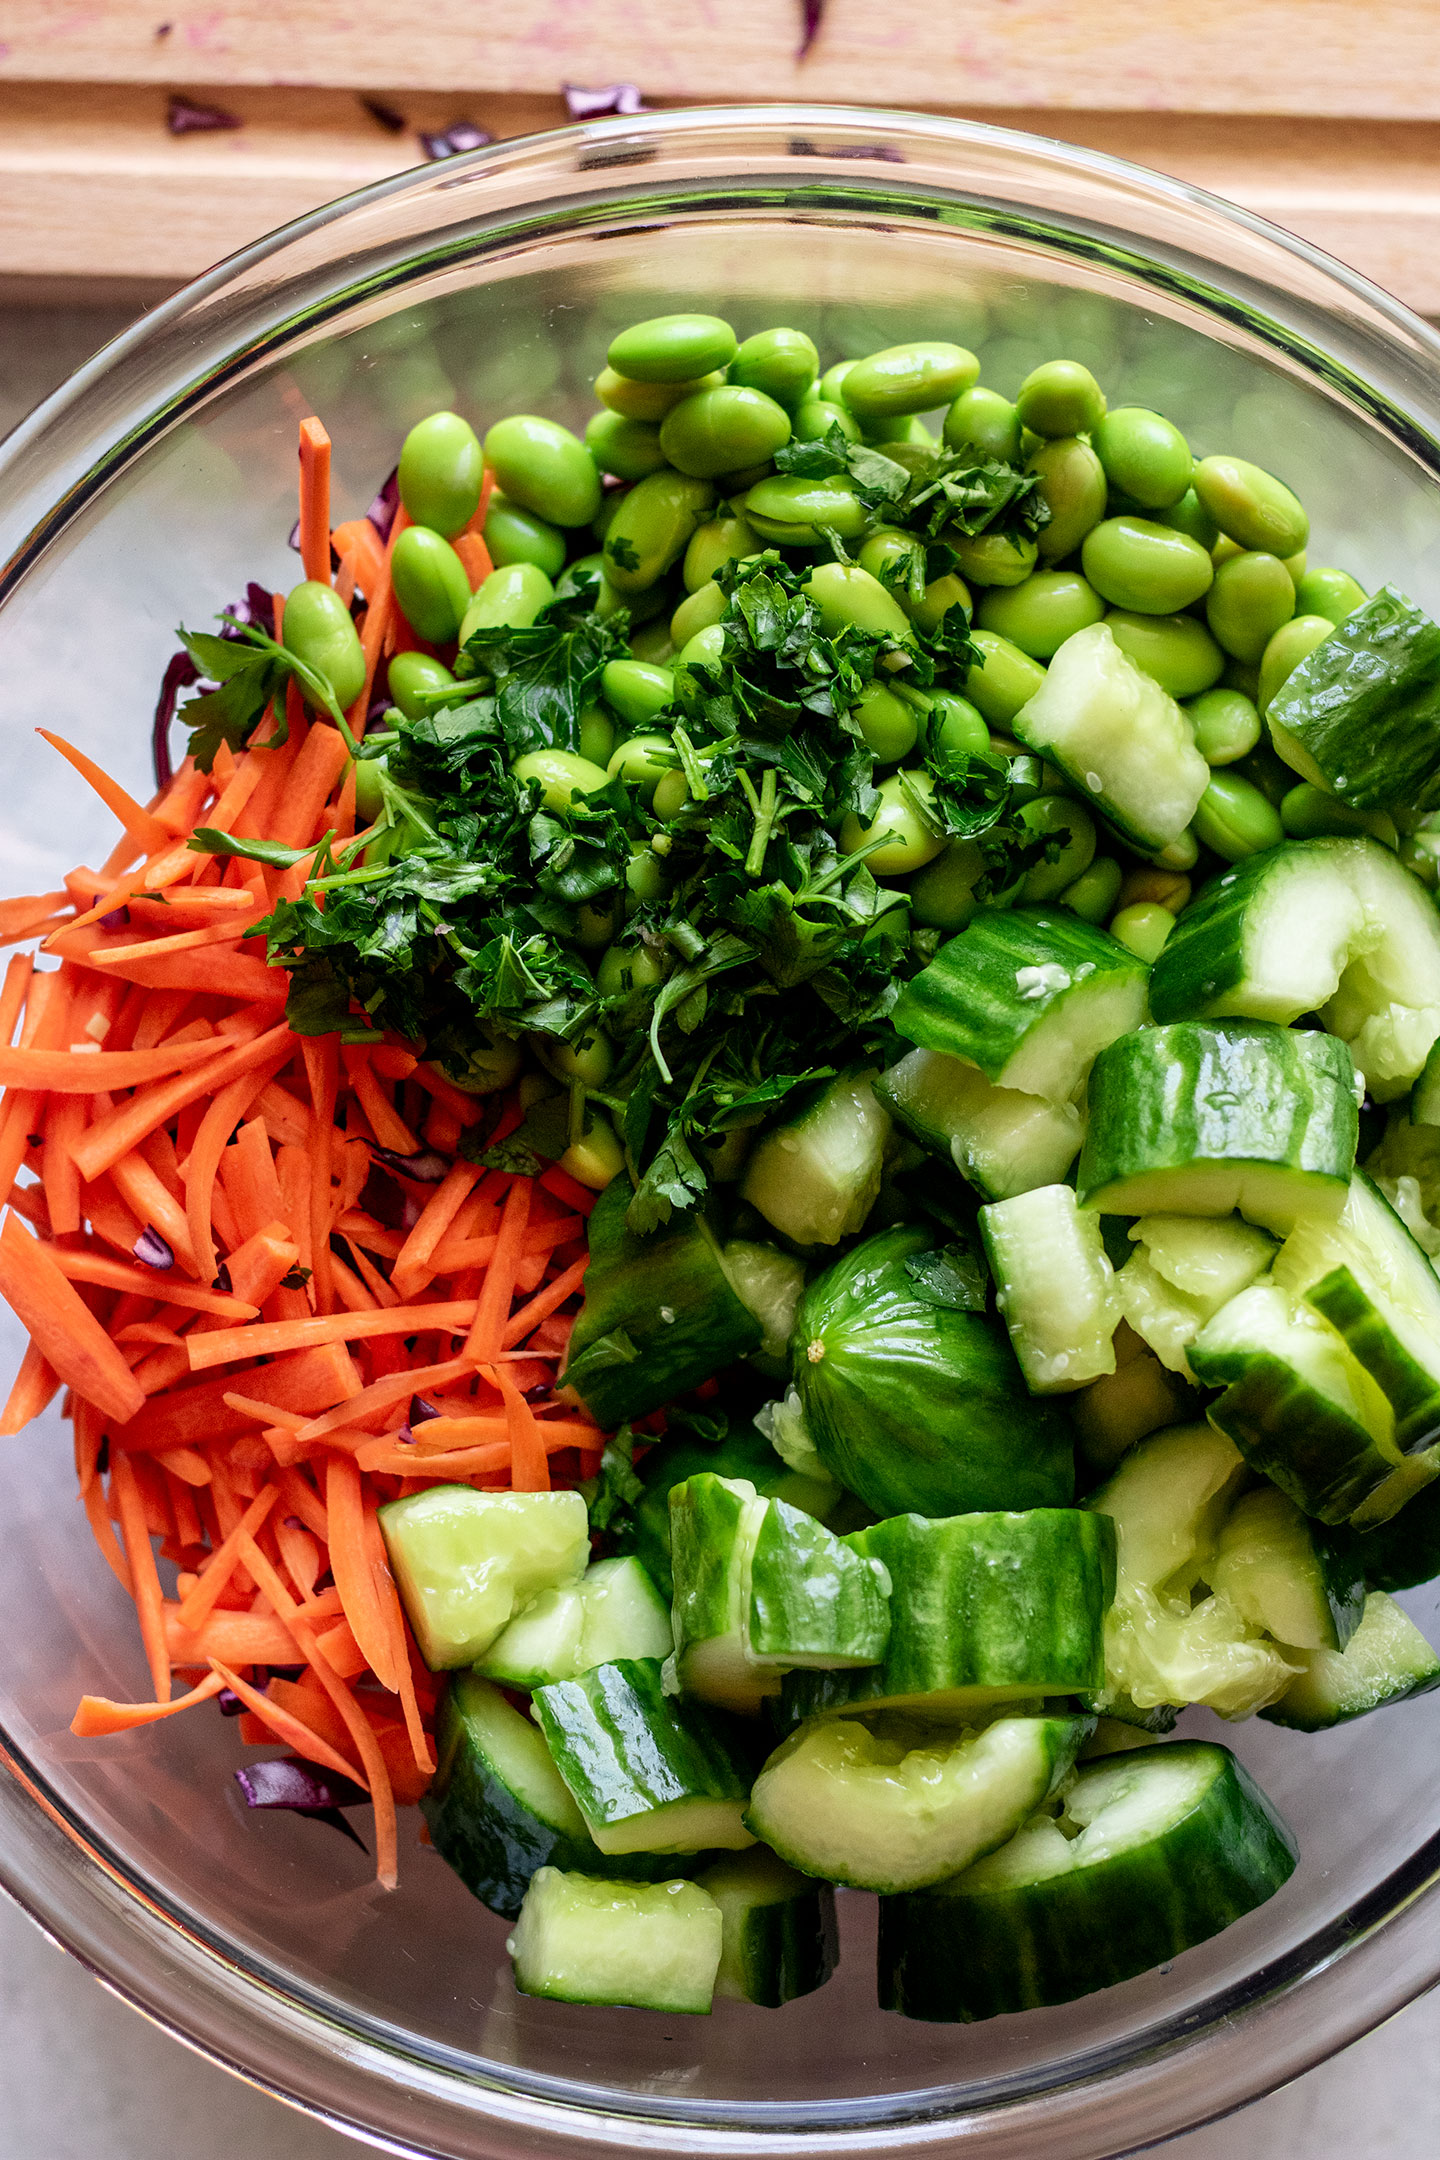 Bowl of edamame, smashed cucumber, cabbage, carrots and herbs.